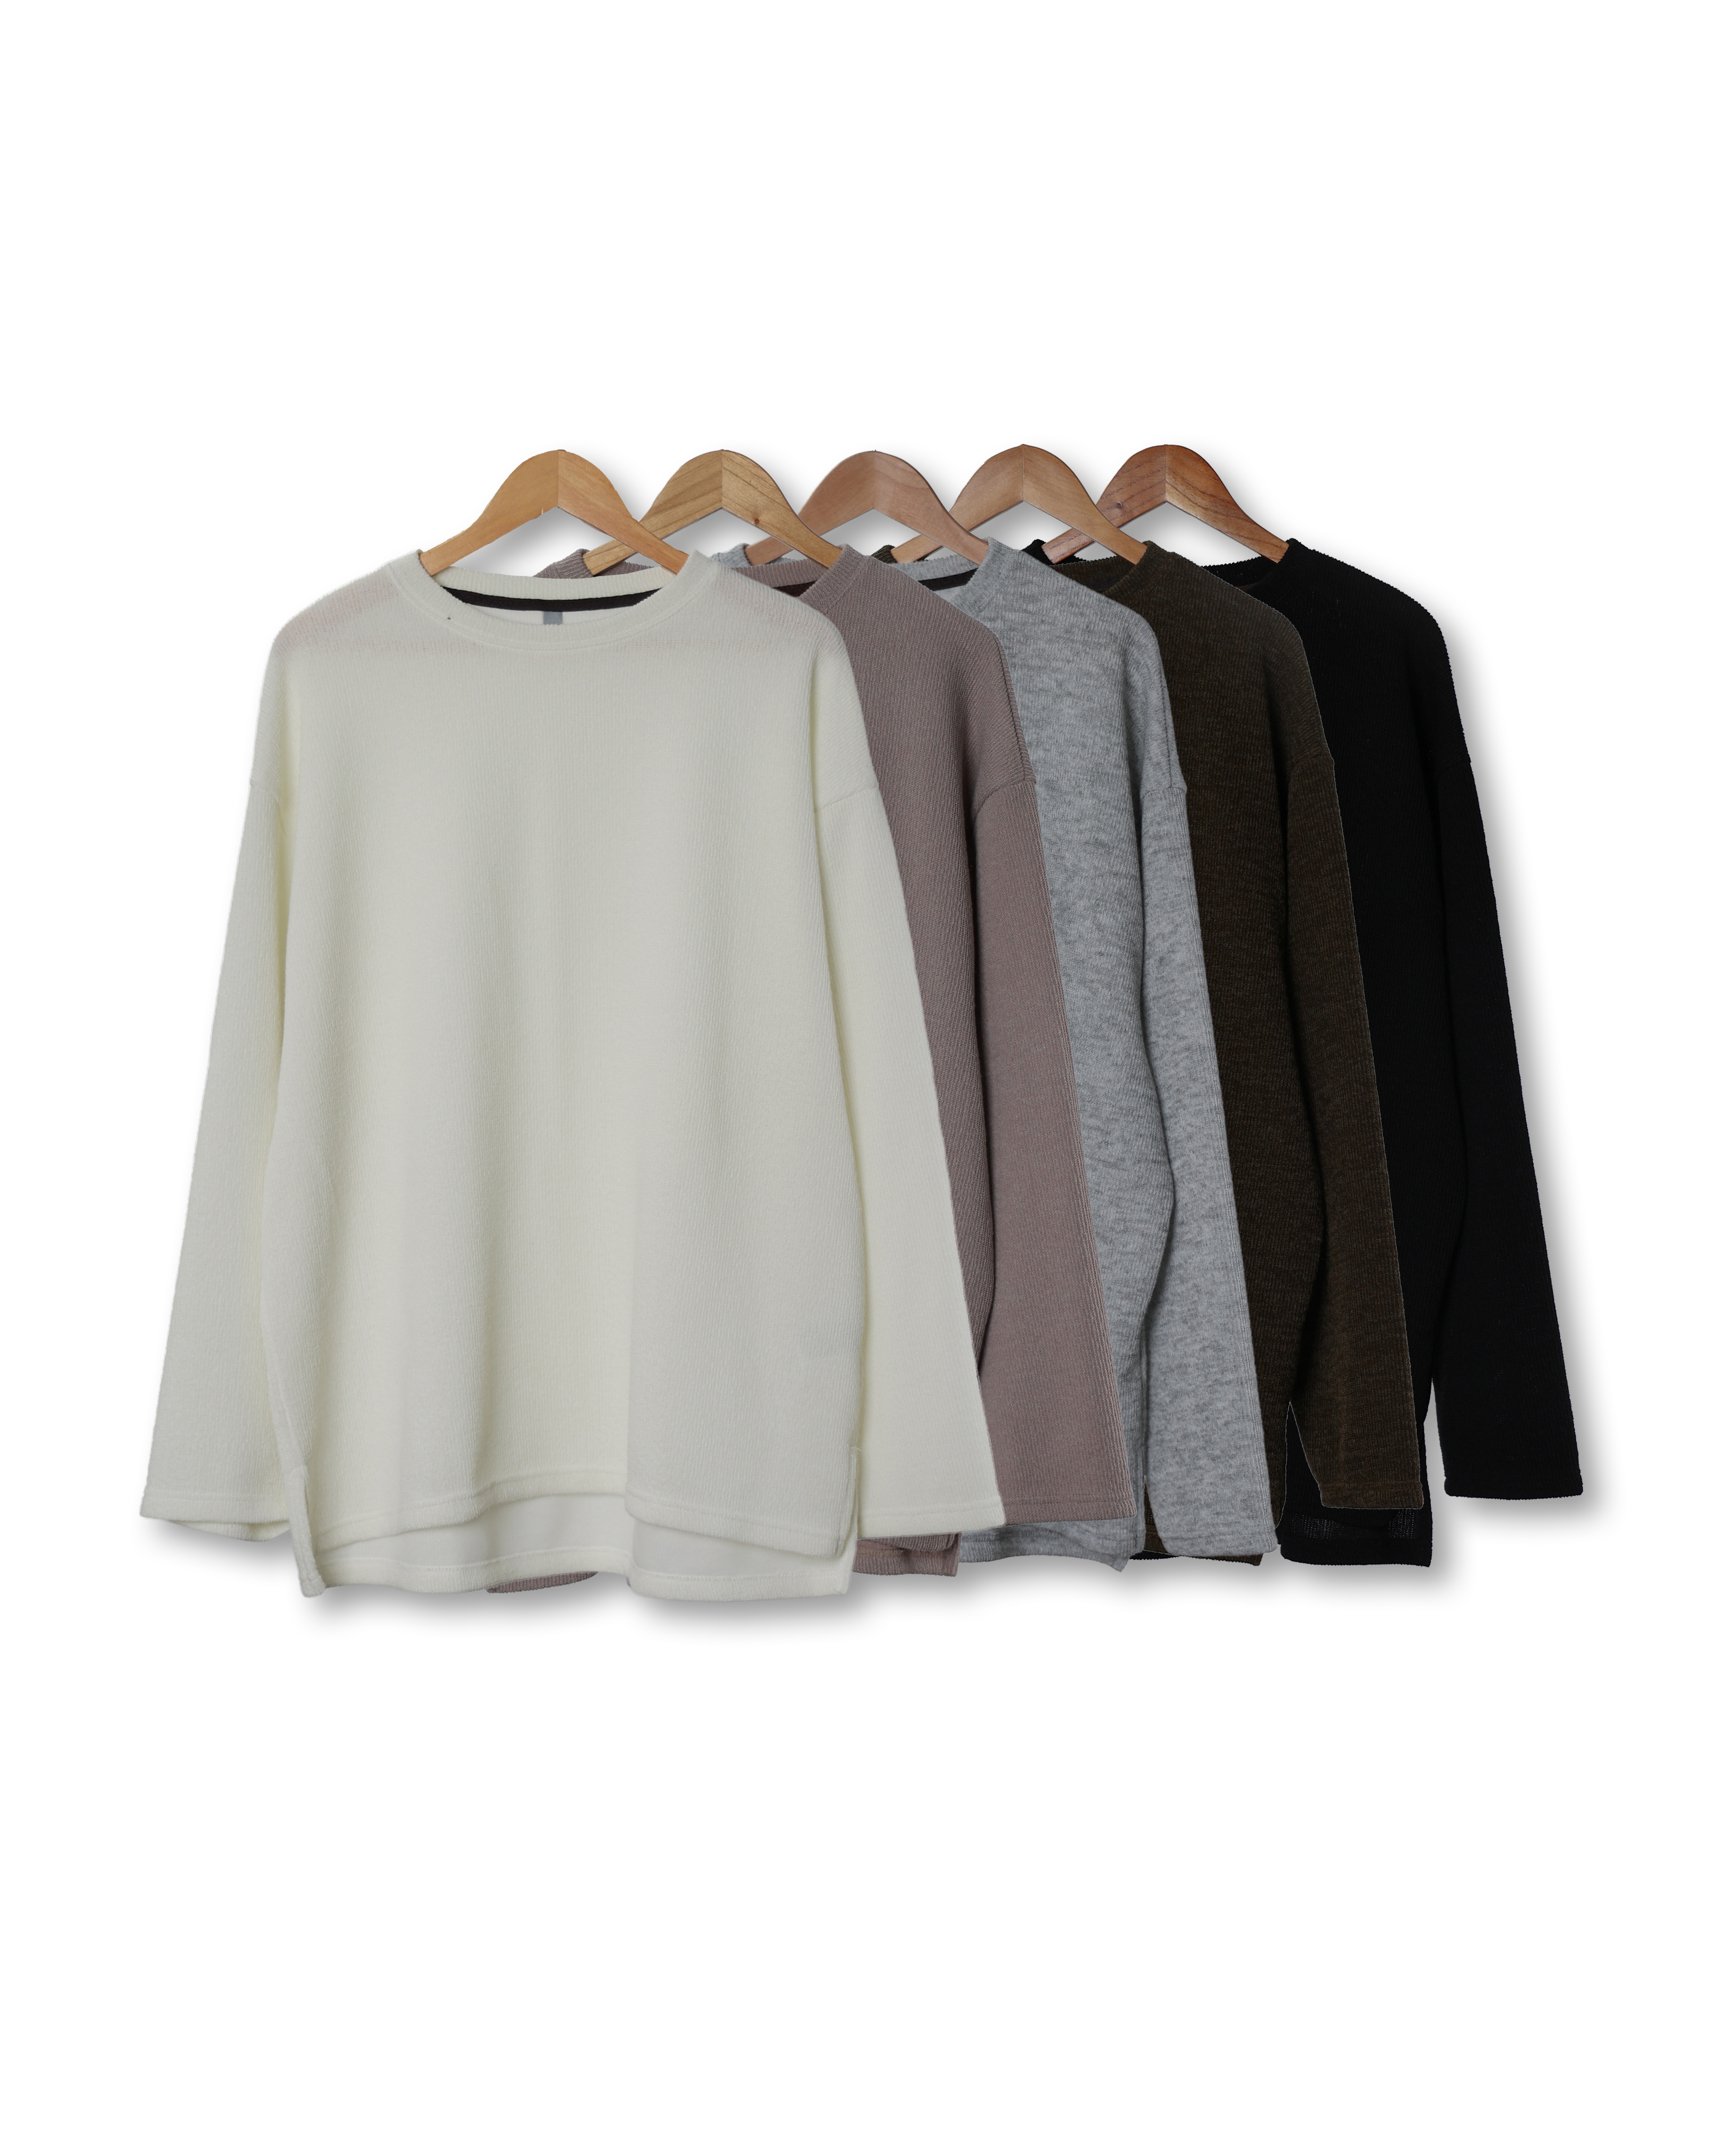 CONS Daily Easy SOOM Knit Long Sleeve (Black/Olive/Gray/Beige/Ivory)